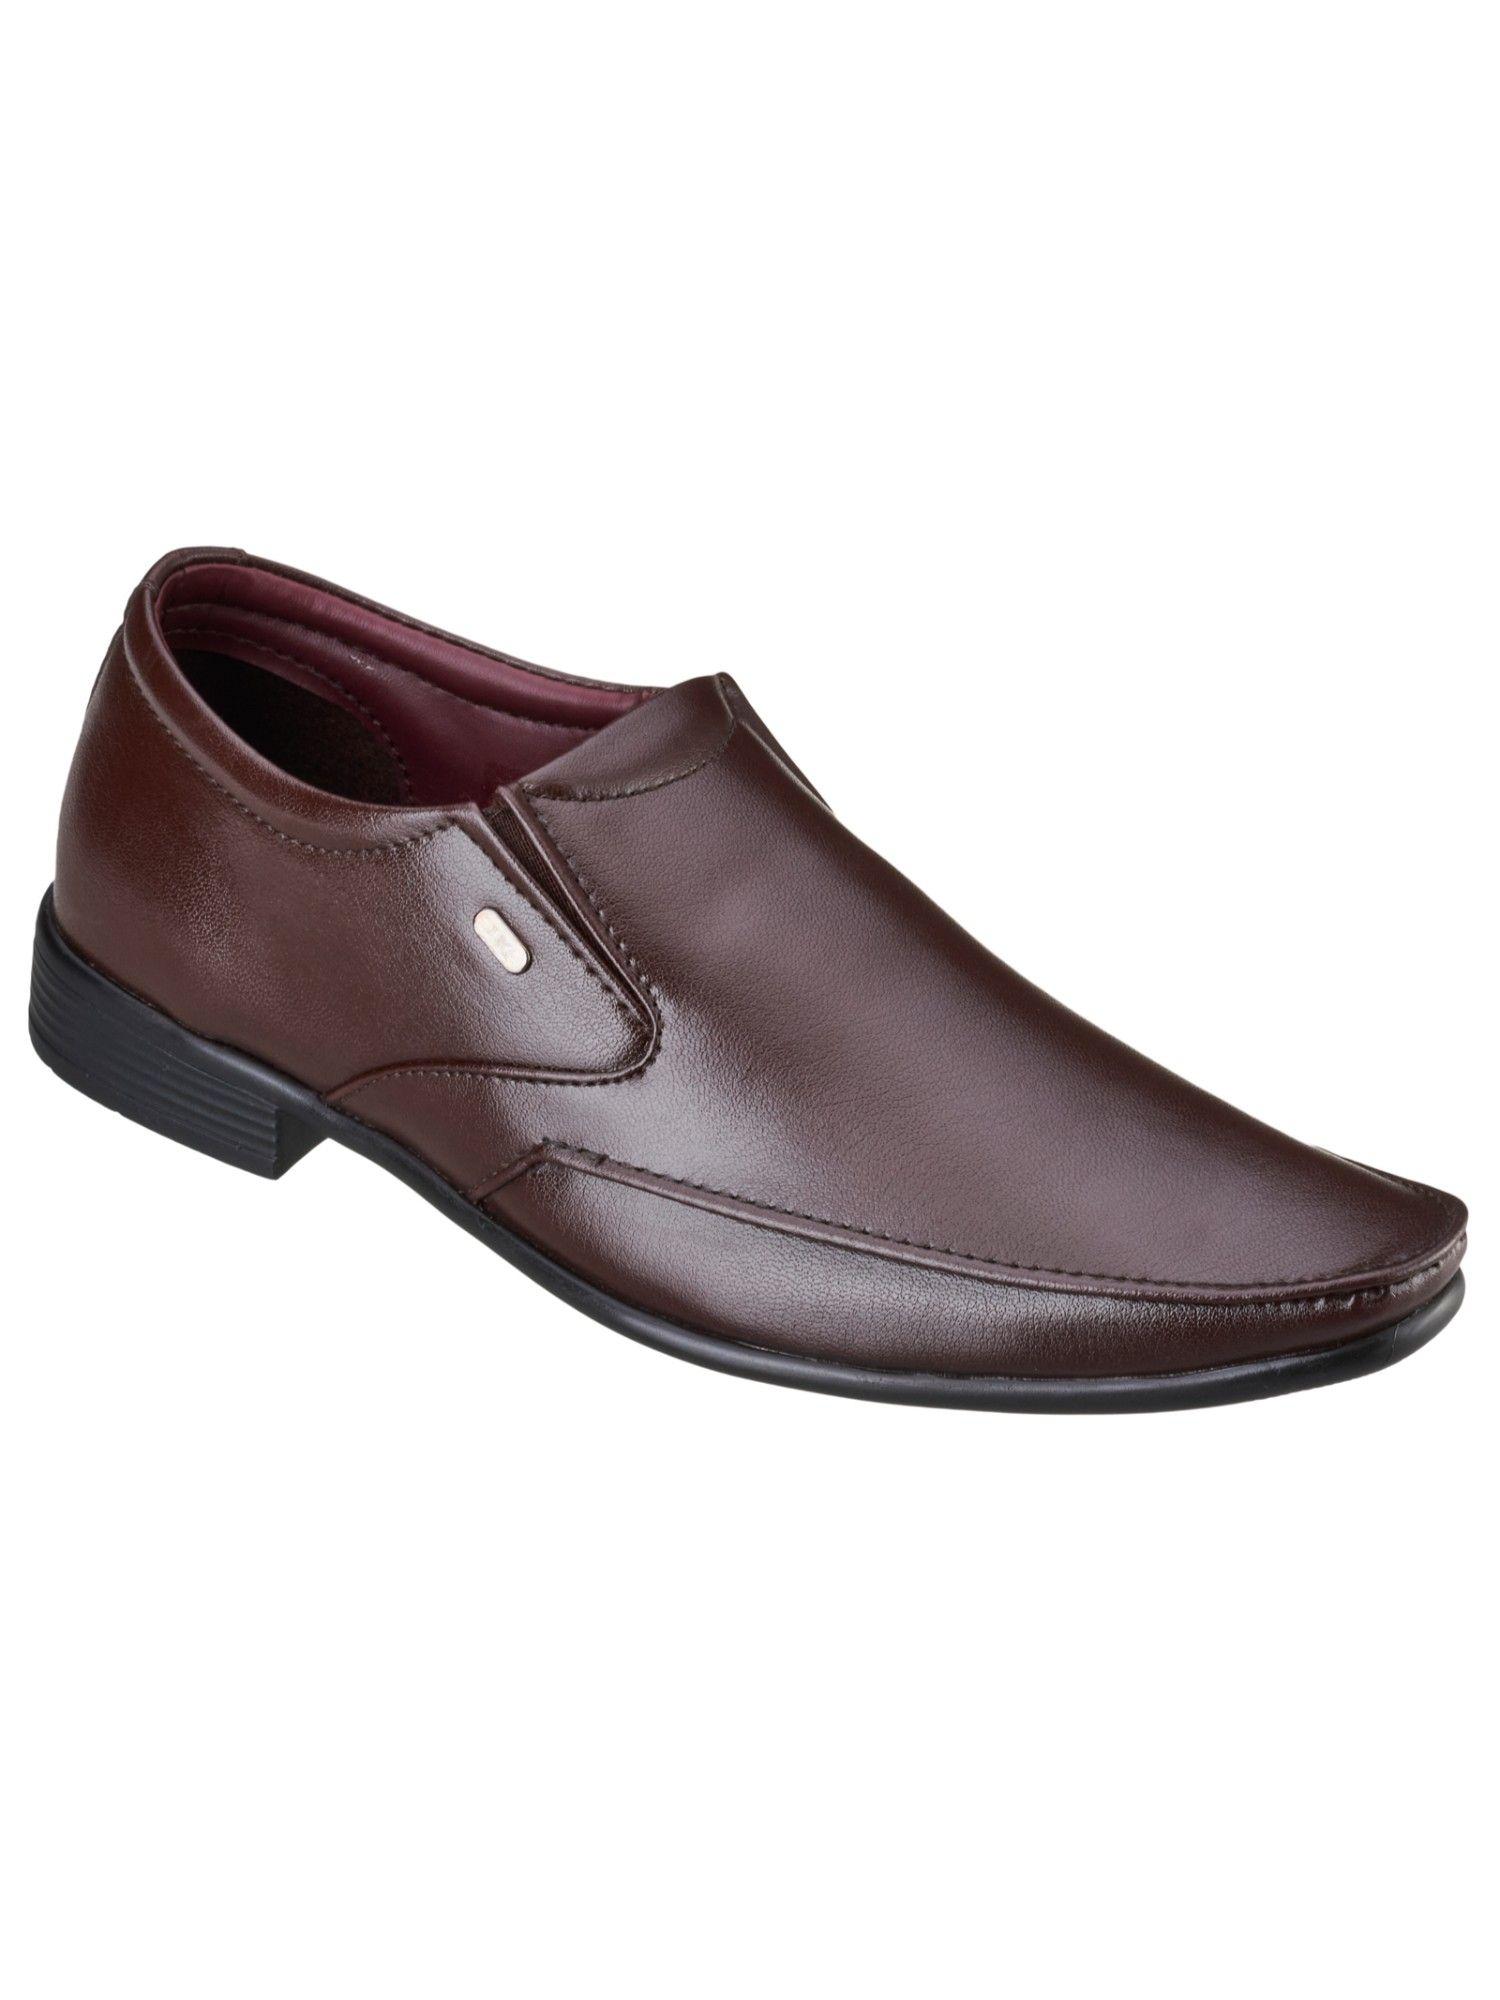 solid/plain brown formal shoes